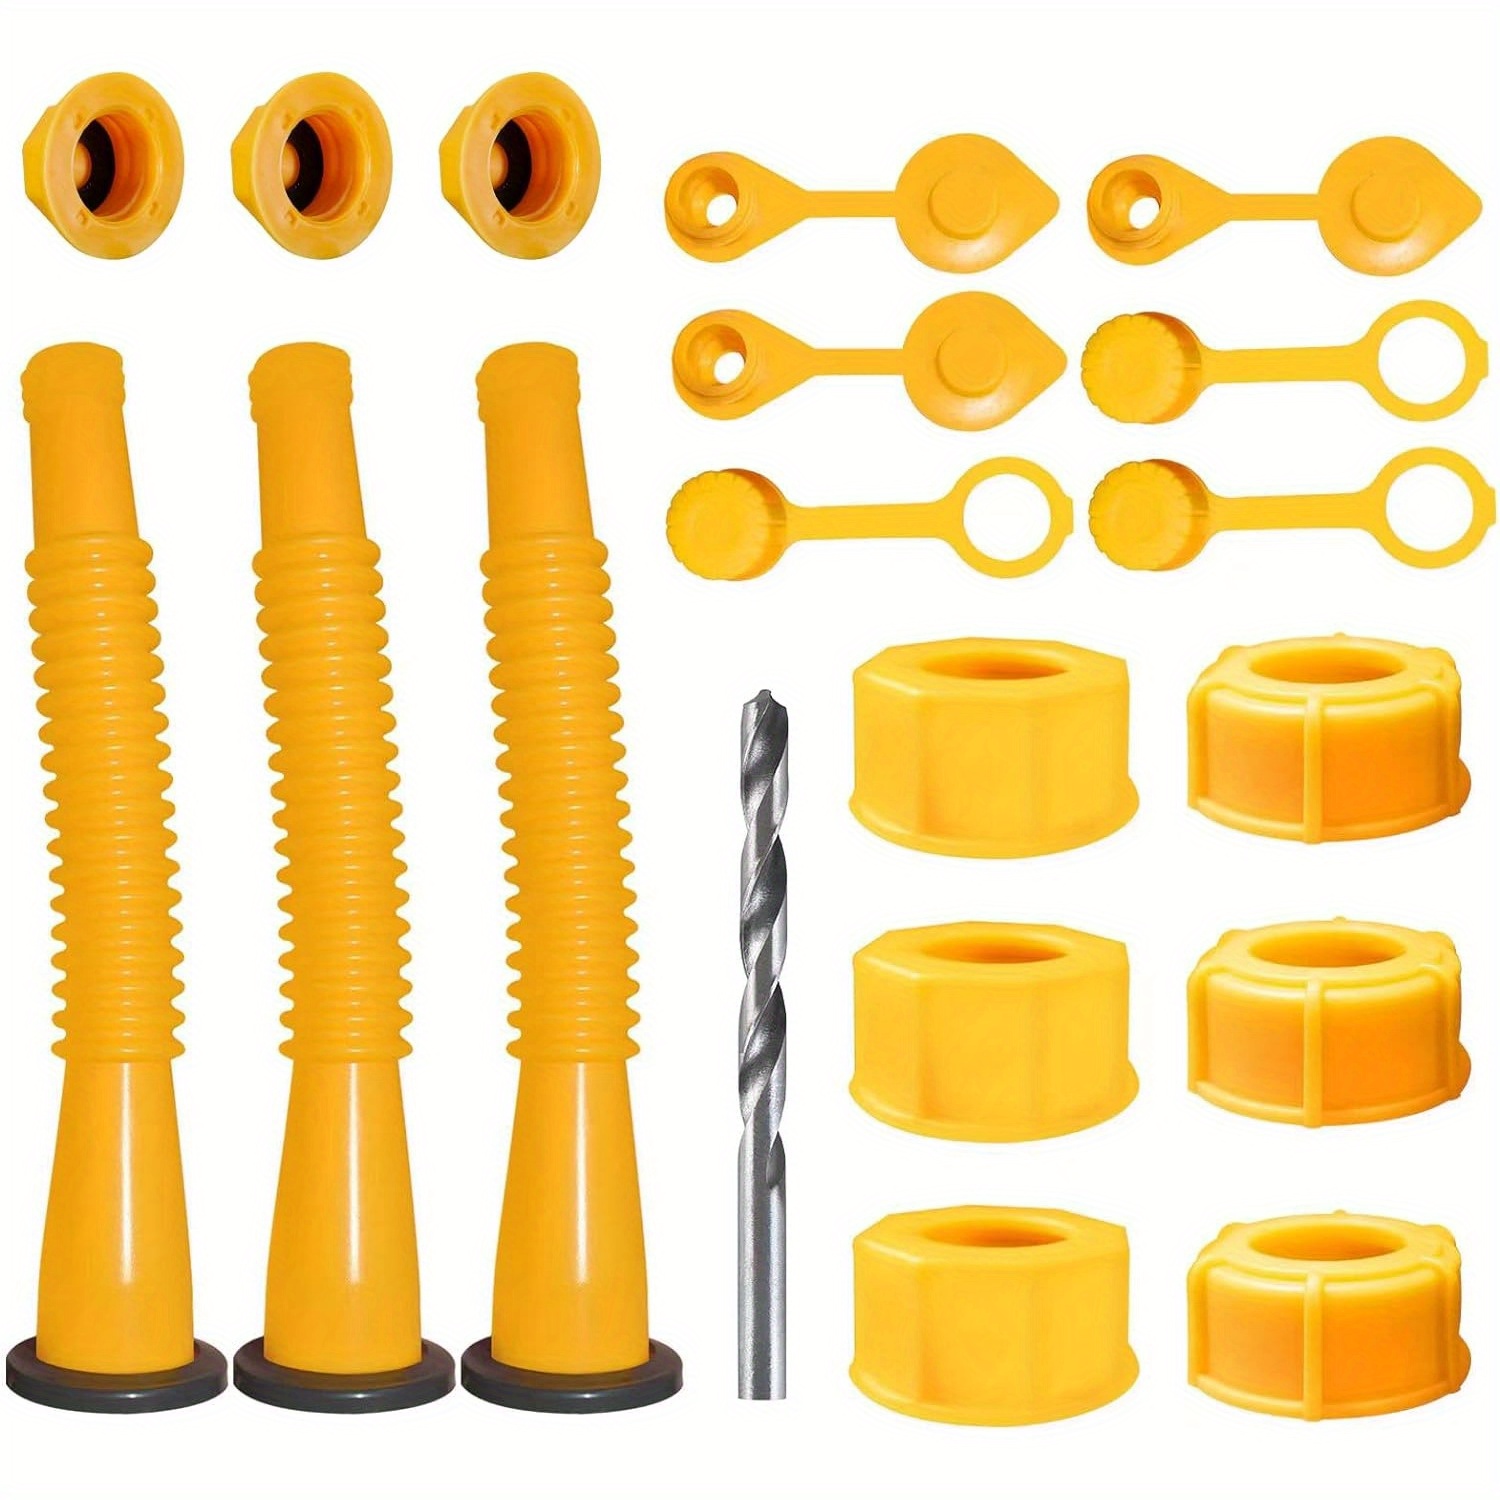 

Gas Can Spout Replacement, Gas Can Nozzle, (3 Kit-yellow) Suitable For Most 1/2/5/10 Gal Oil Cans. Gas Spout Replacement, Fuel Can Spout, Gas Tank Nozzle. The Tube Is Soft And Flexible To Use